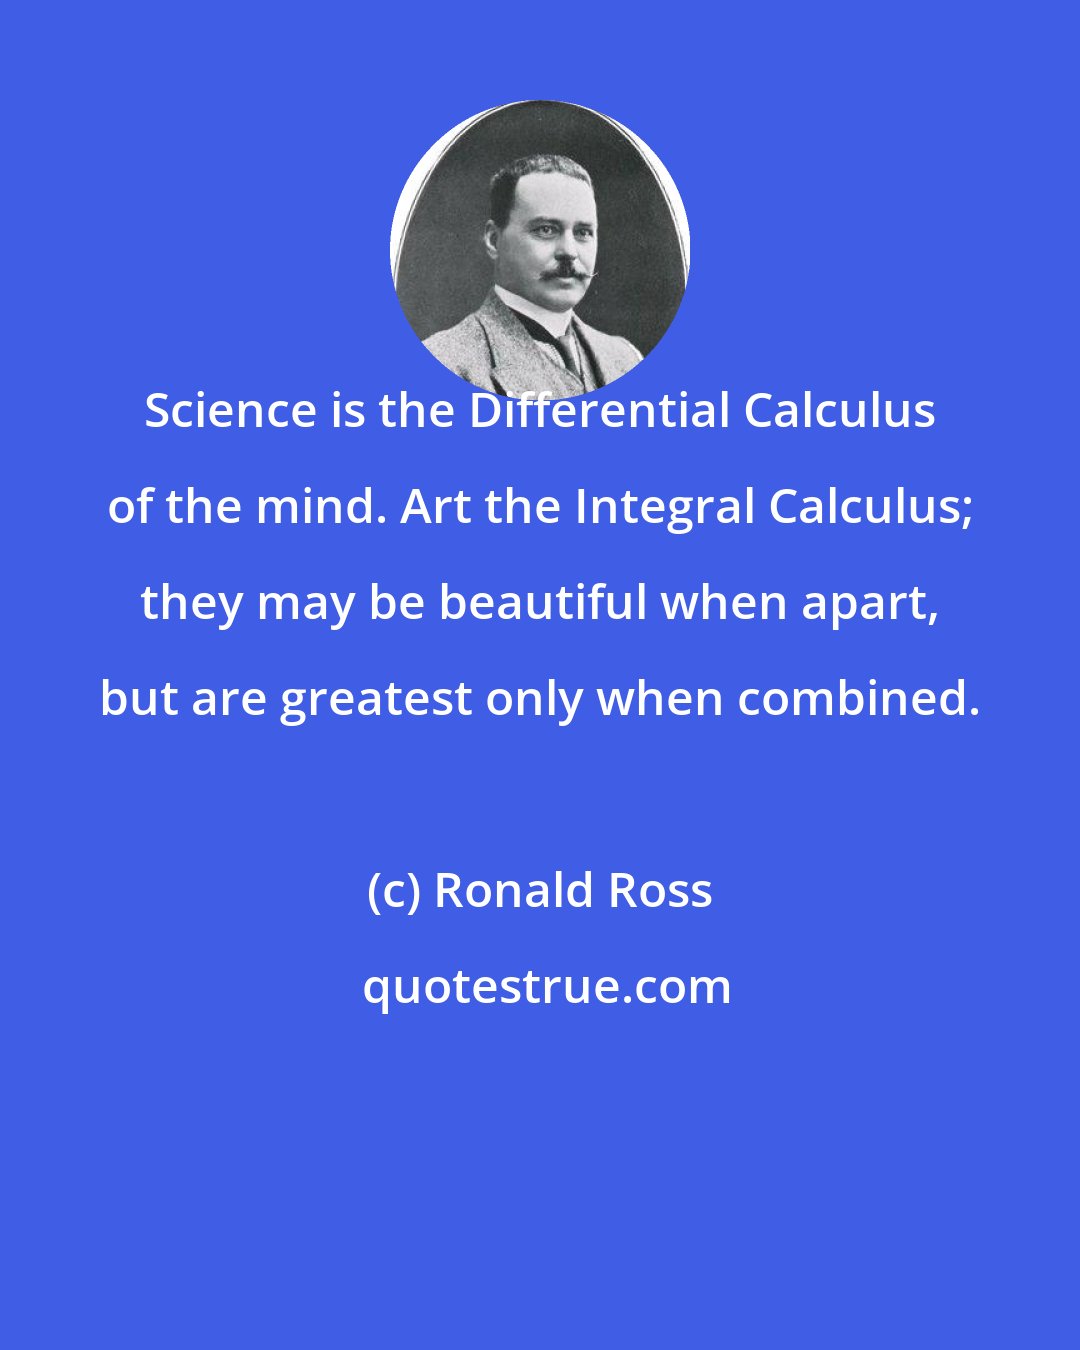 Ronald Ross: Science is the Differential Calculus of the mind. Art the Integral Calculus; they may be beautiful when apart, but are greatest only when combined.